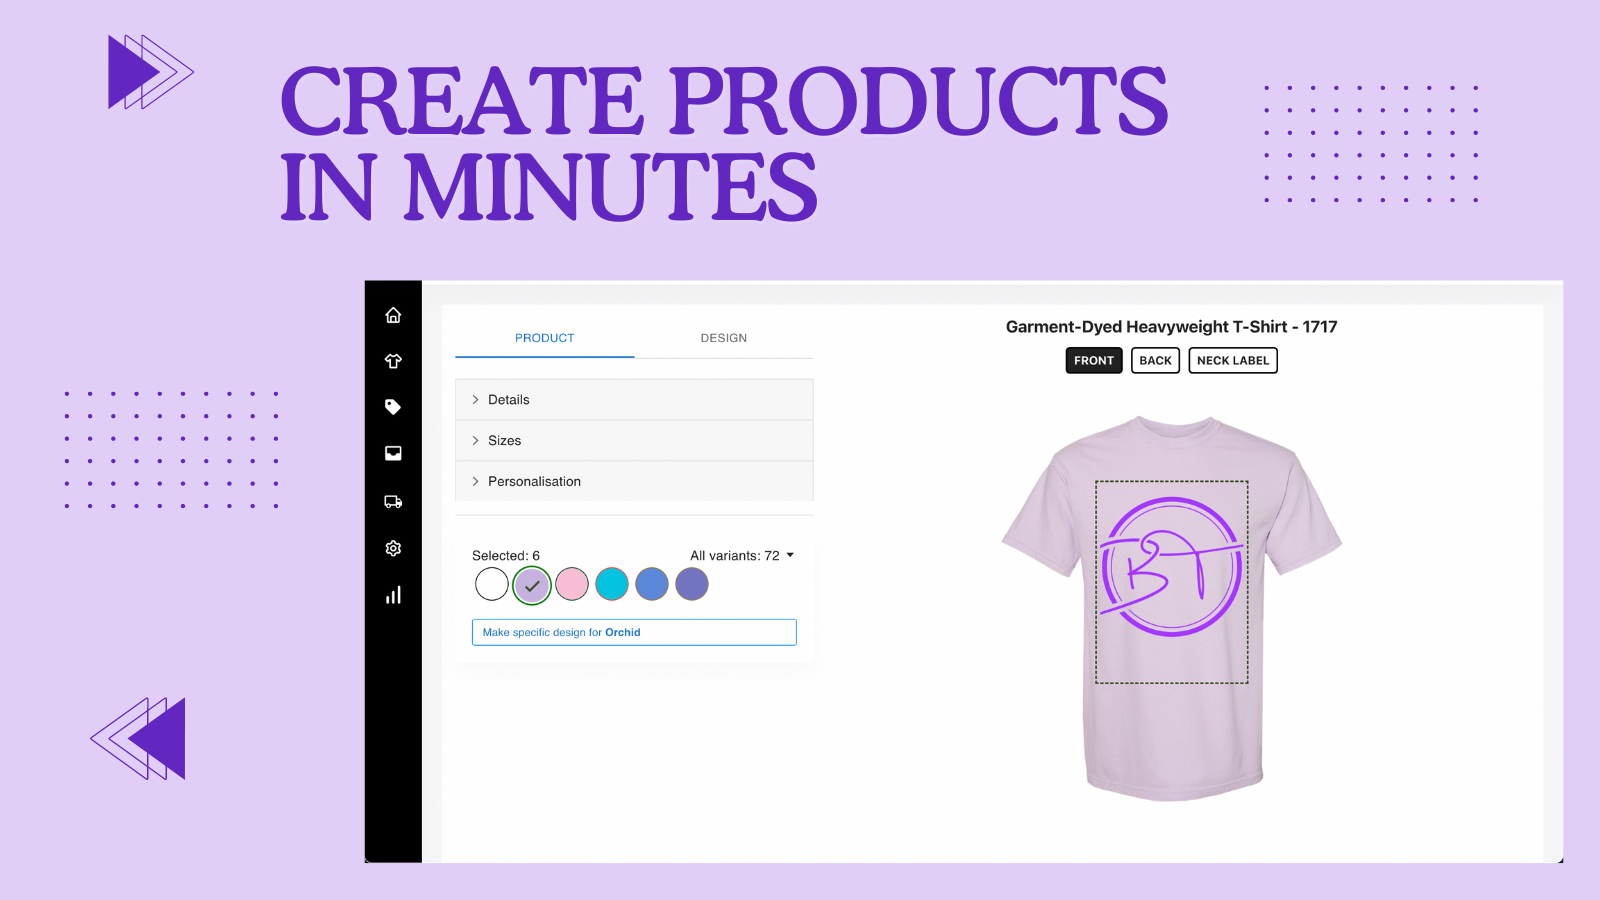 Easy to use customizer to create products for your brand.